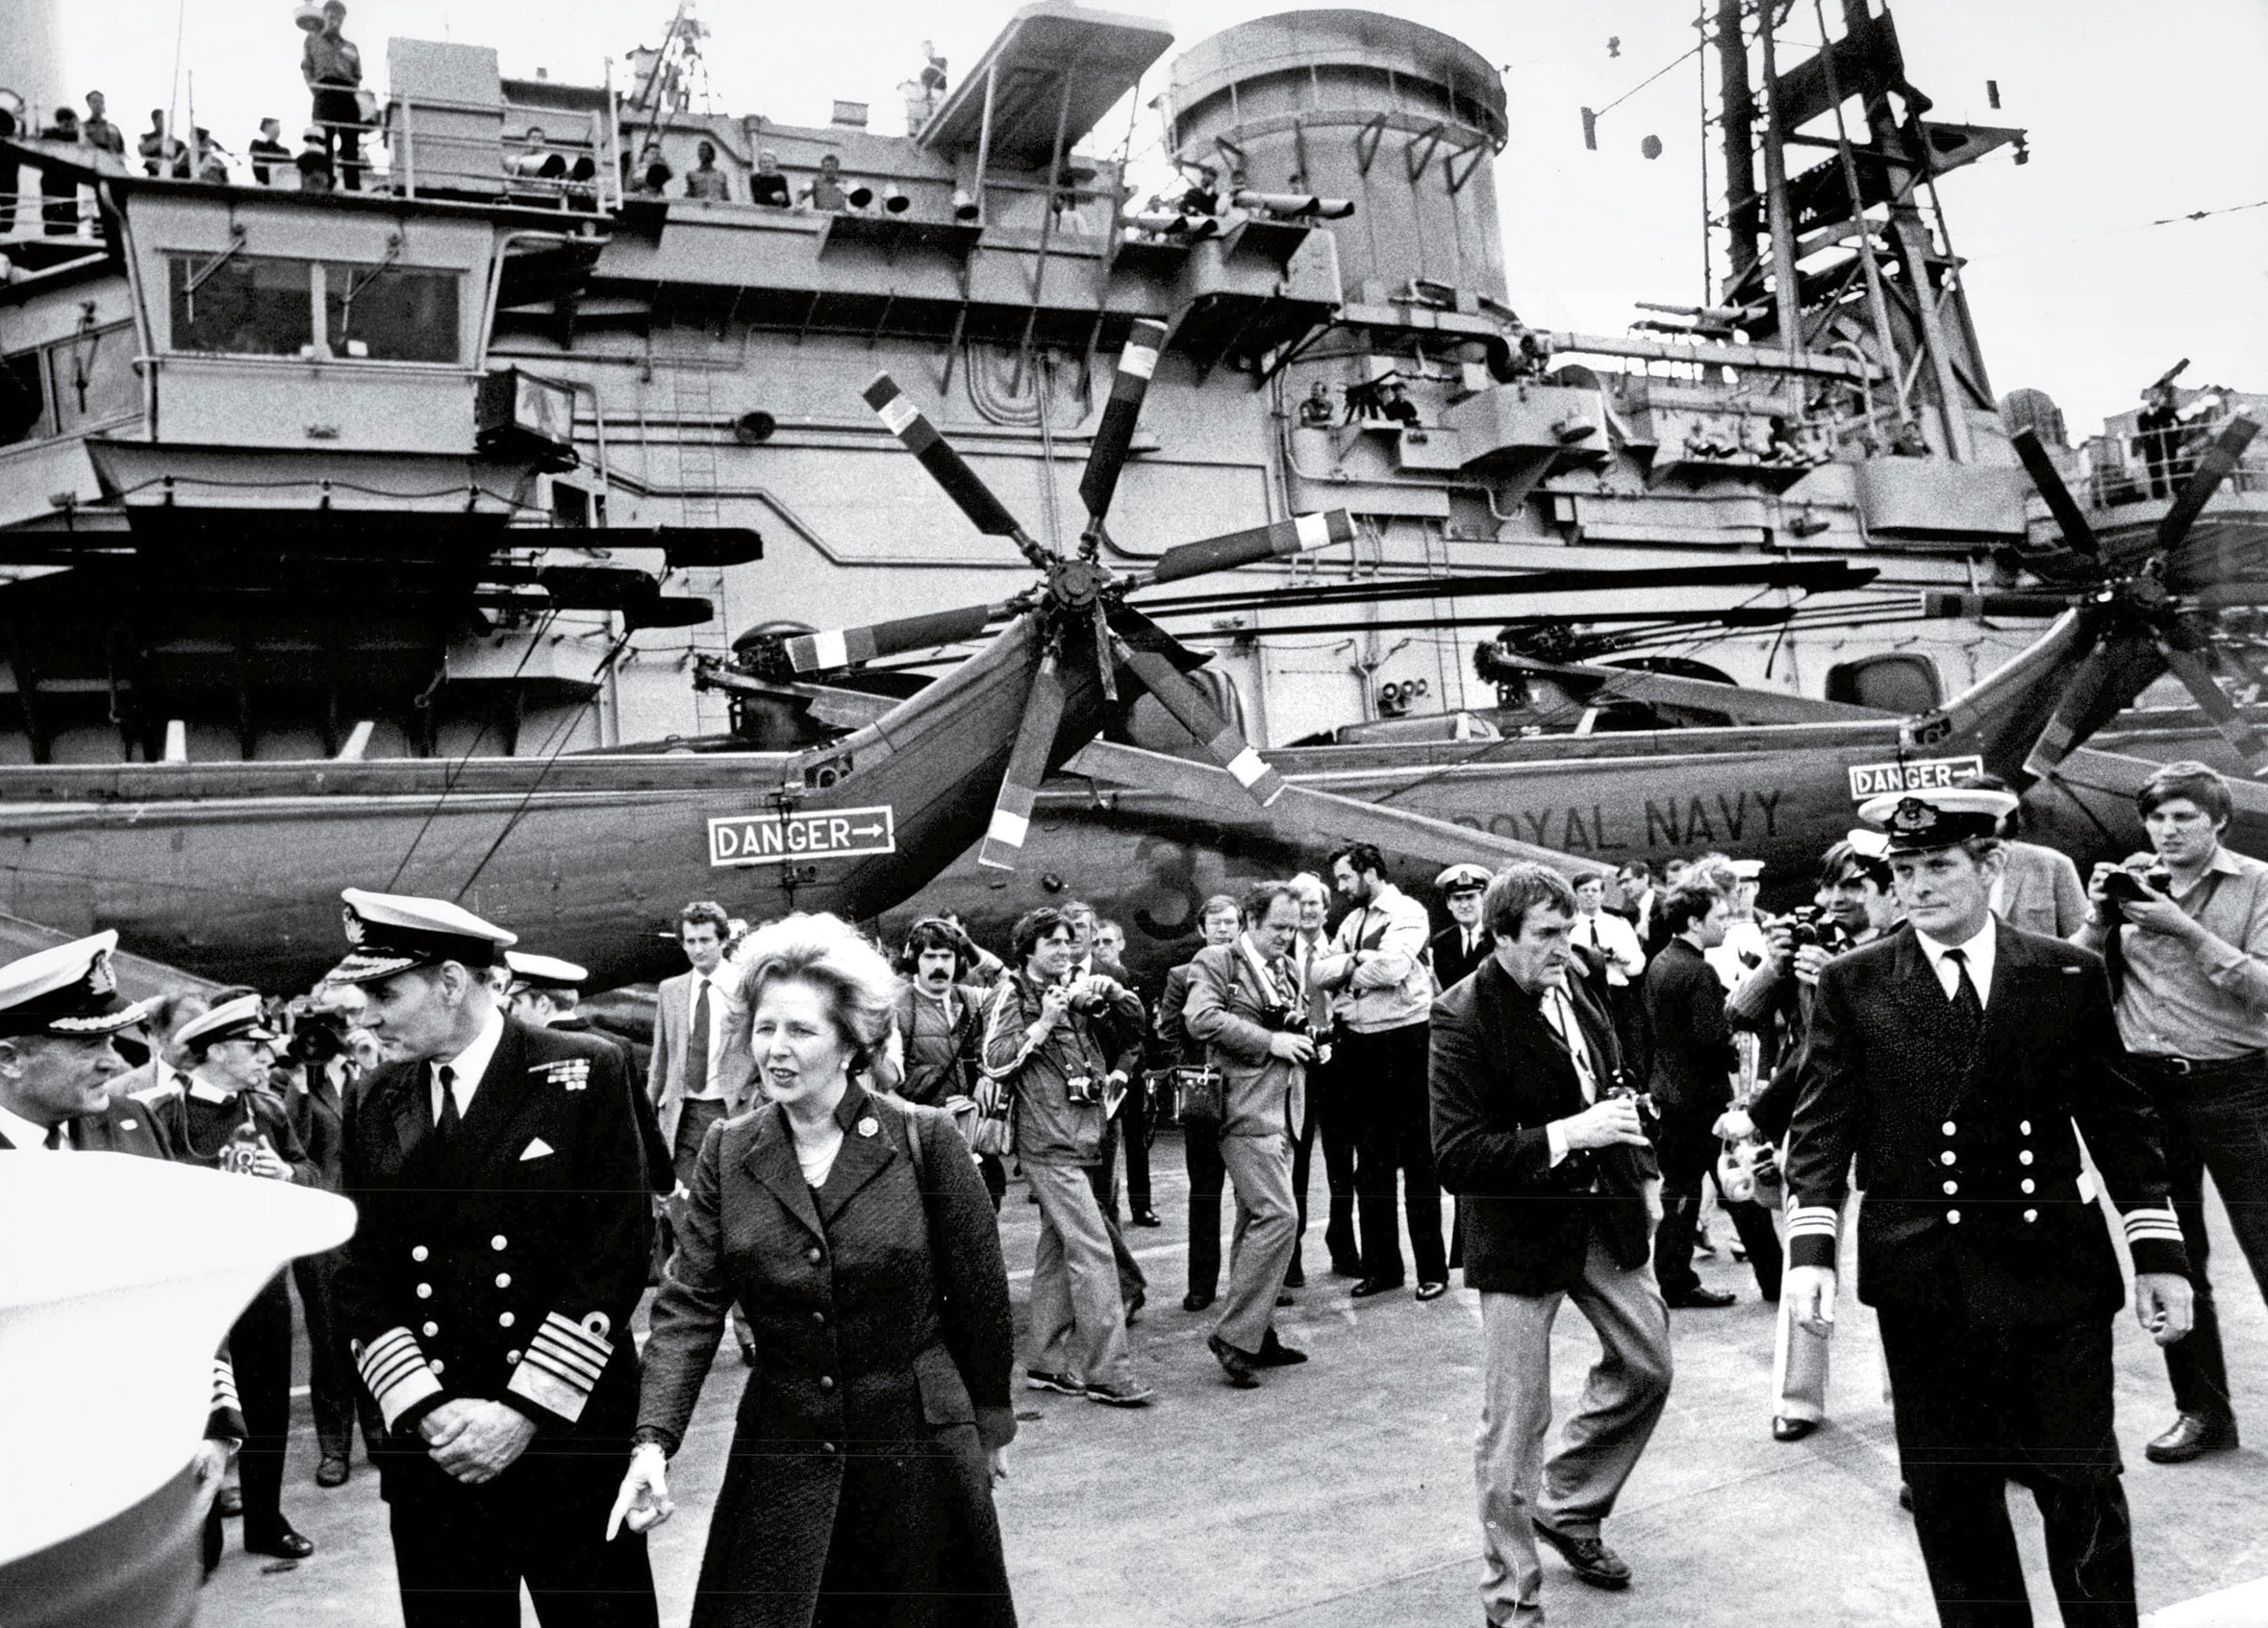 Thatcher aboard H.M.S. Hermes after its return from the Falklands War in 1982. (Ted Blackbrow—Associated Newspapers)